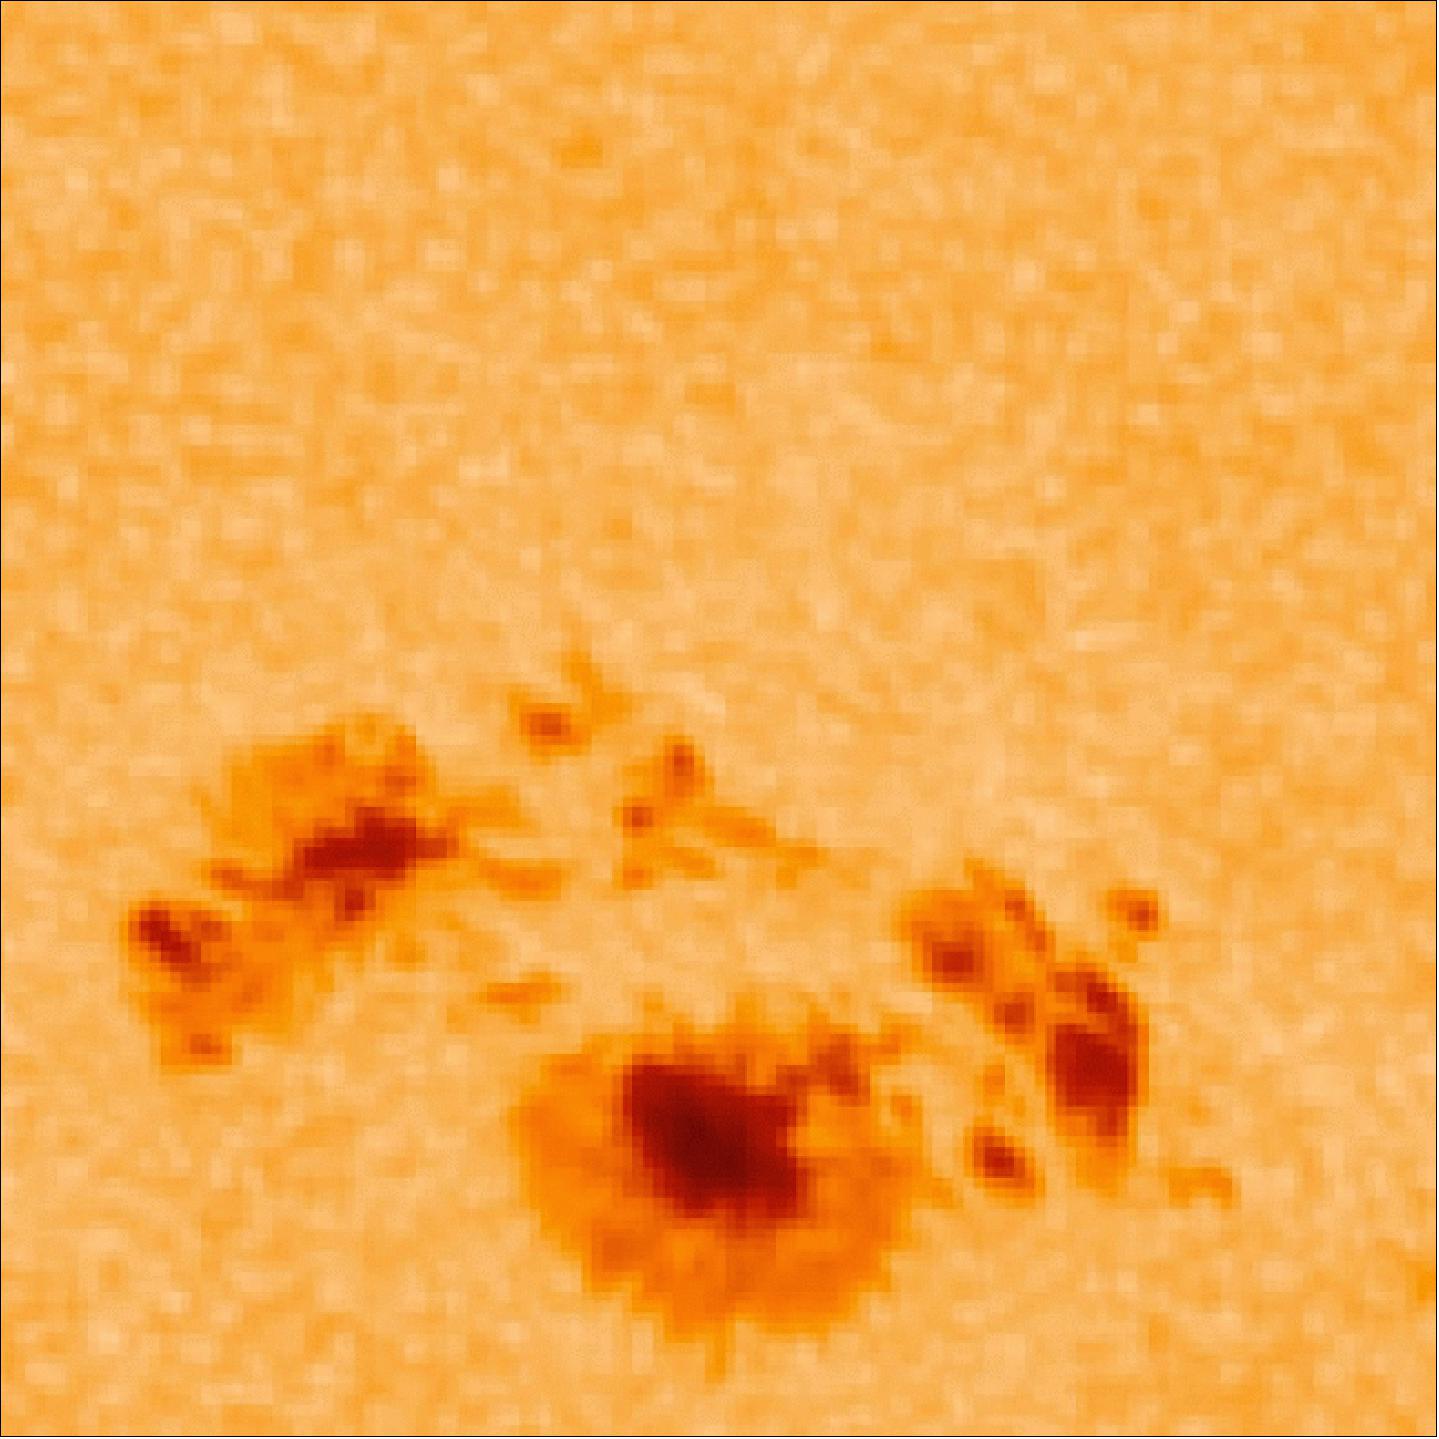 Figure 25: A closeup of the sunspot at the root of the March 29, 2014, X-class flare taken by the HMI instrument of SDO (image credit: NASA)